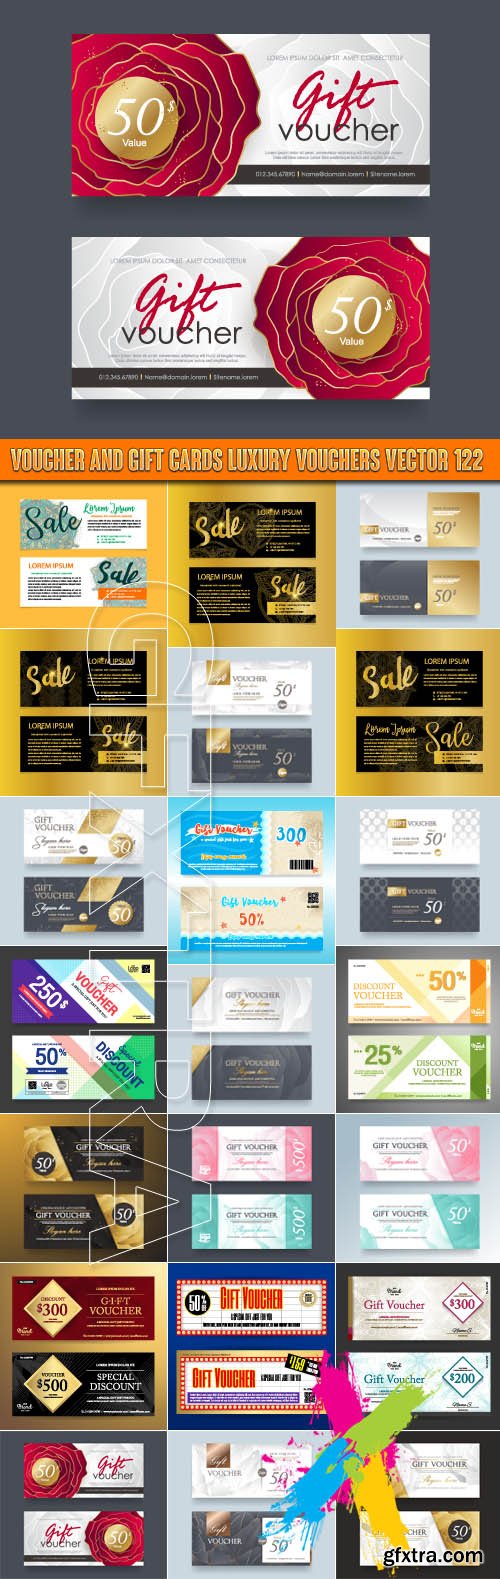 Voucher and gift cards luxury vouchers vector 122